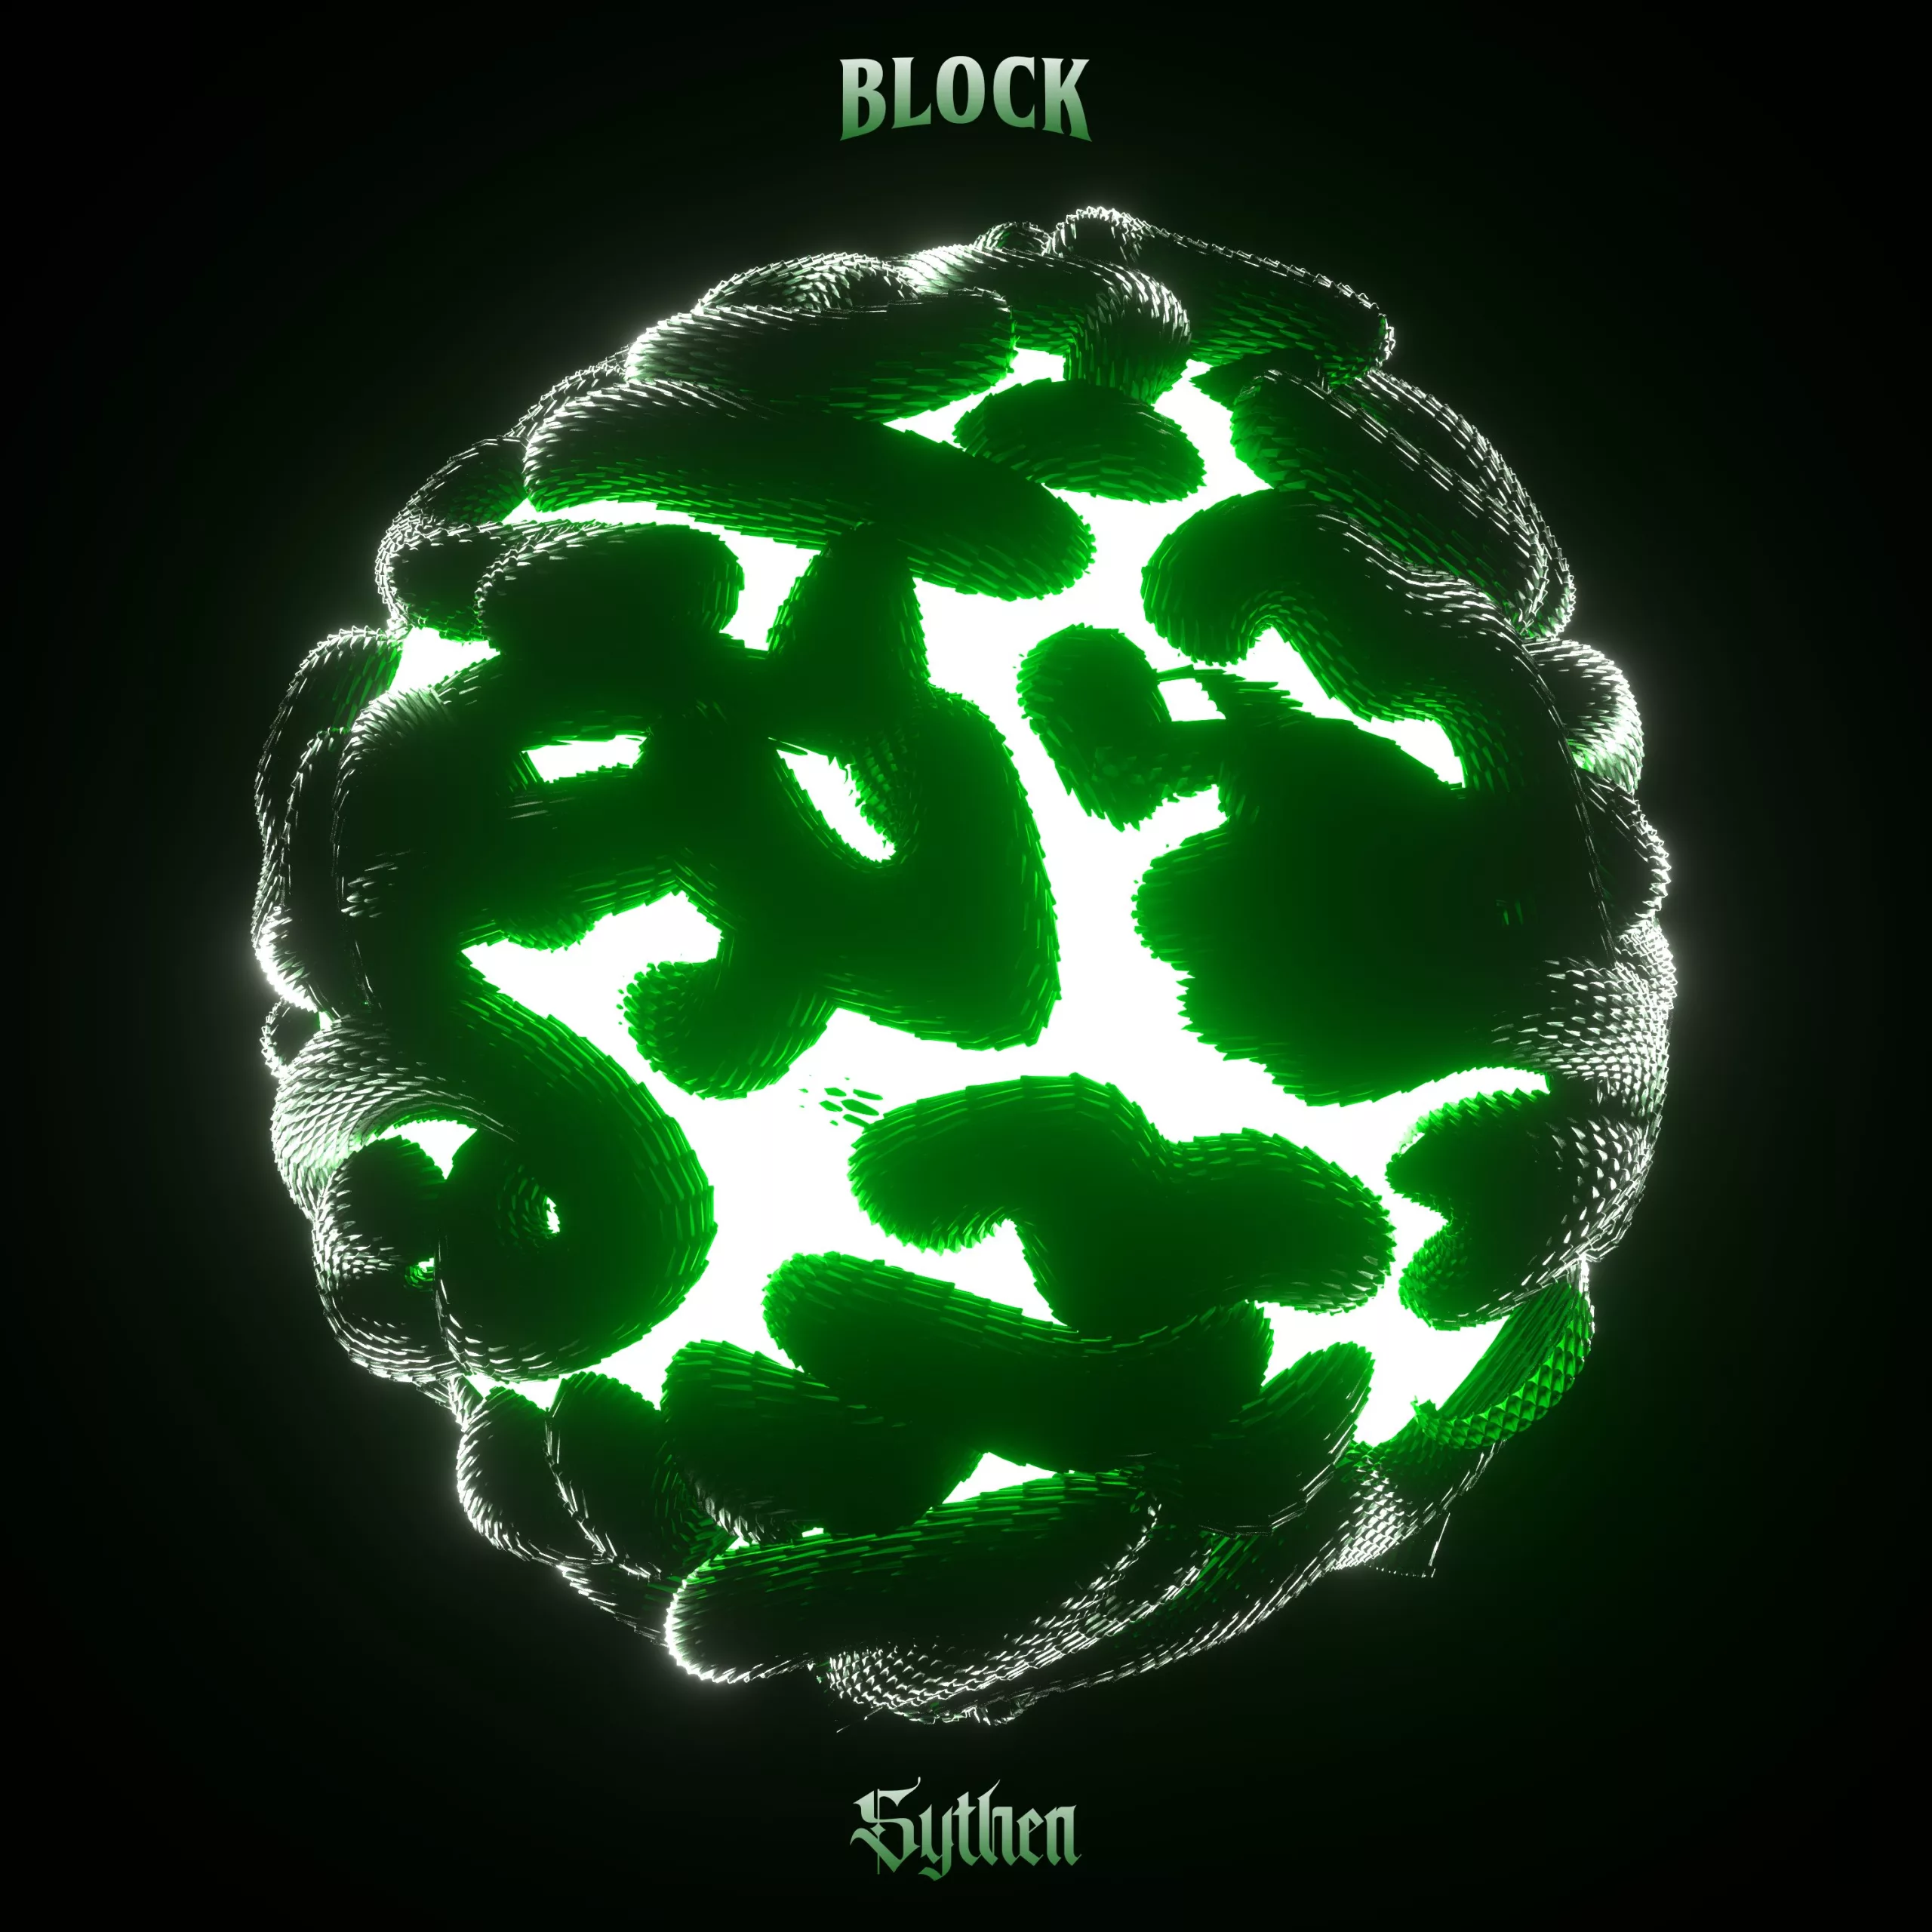 Sythen takes us down his ‘Block’ with latest single